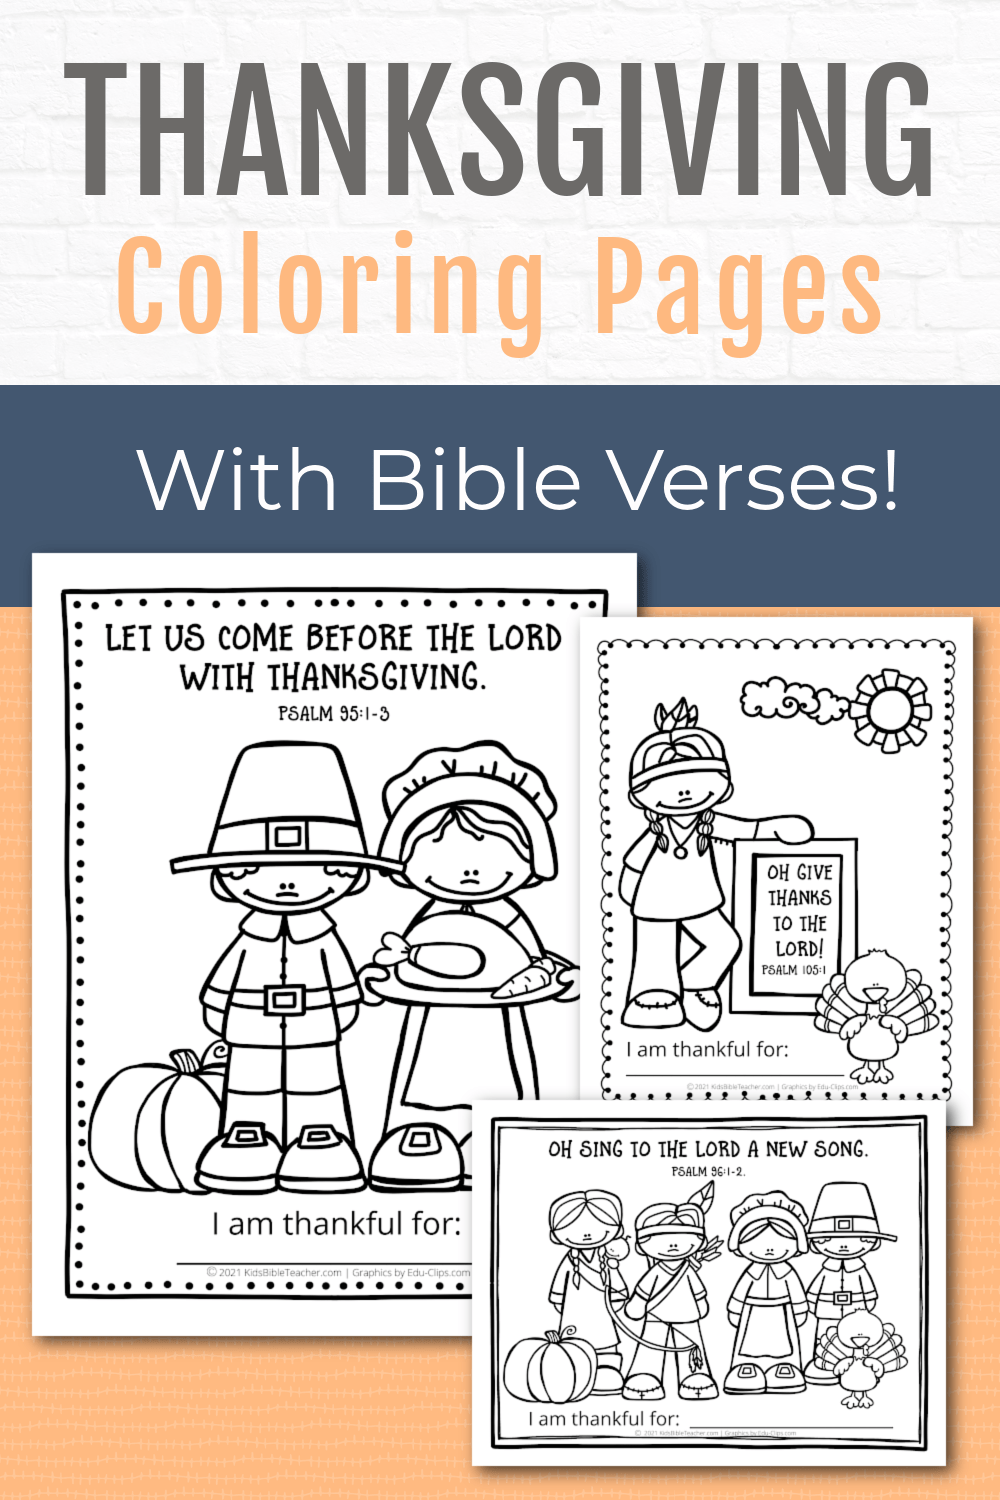 Help your little ones celebrate Thanksgiving with these free, fun printable Thanksgiving Coloring Pictures. Great for classroom or home use!